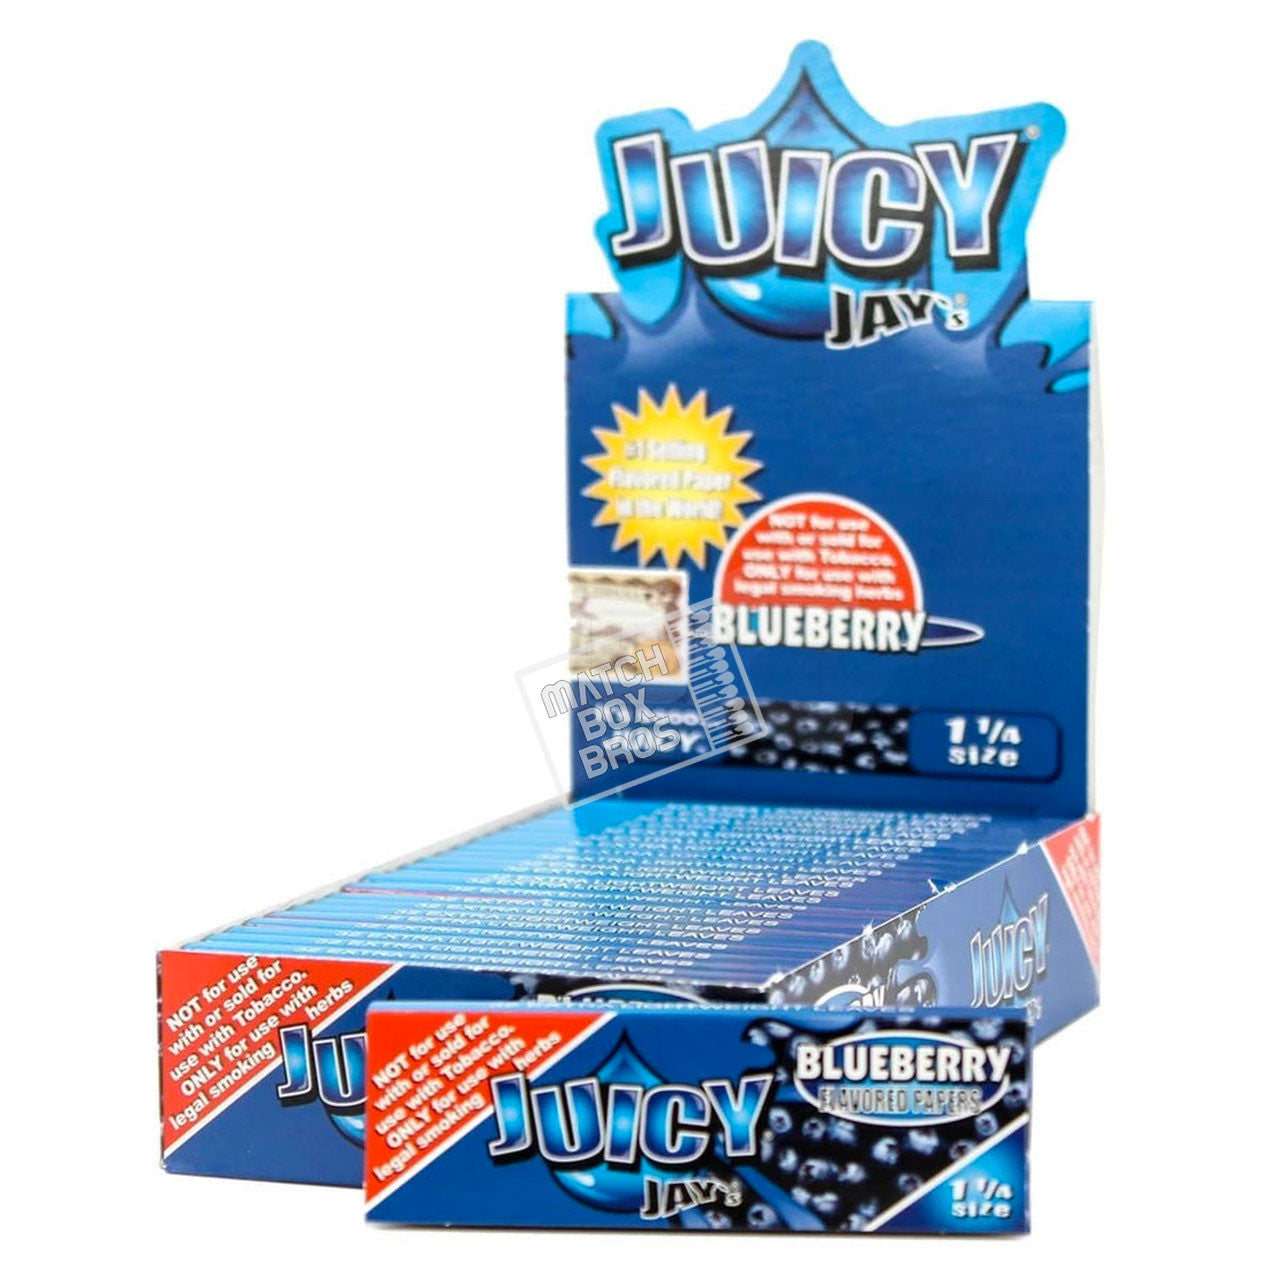 Juicy Jay's 1¼ Blueberry Flavoured Paper Full Box